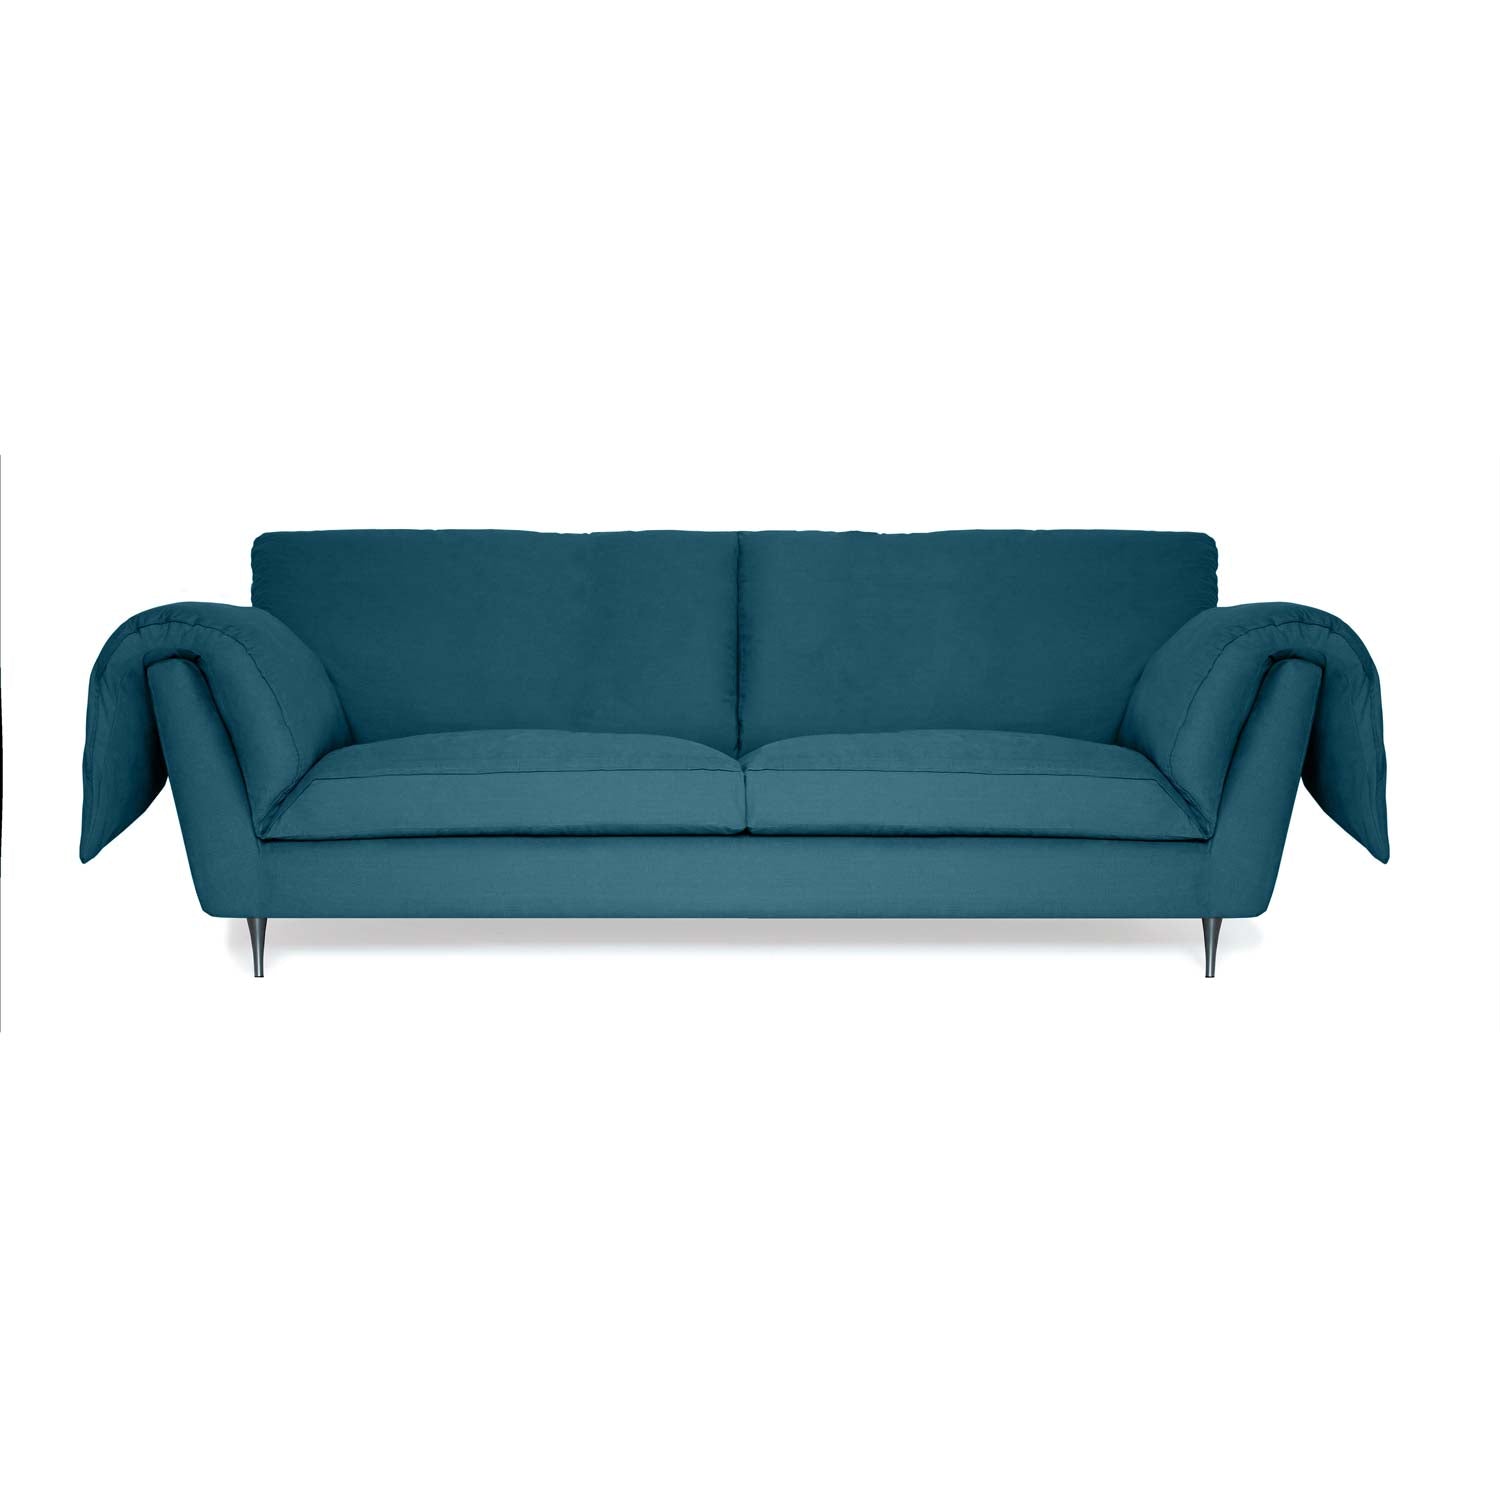 Contemporary design with angled lines. green linen sofa